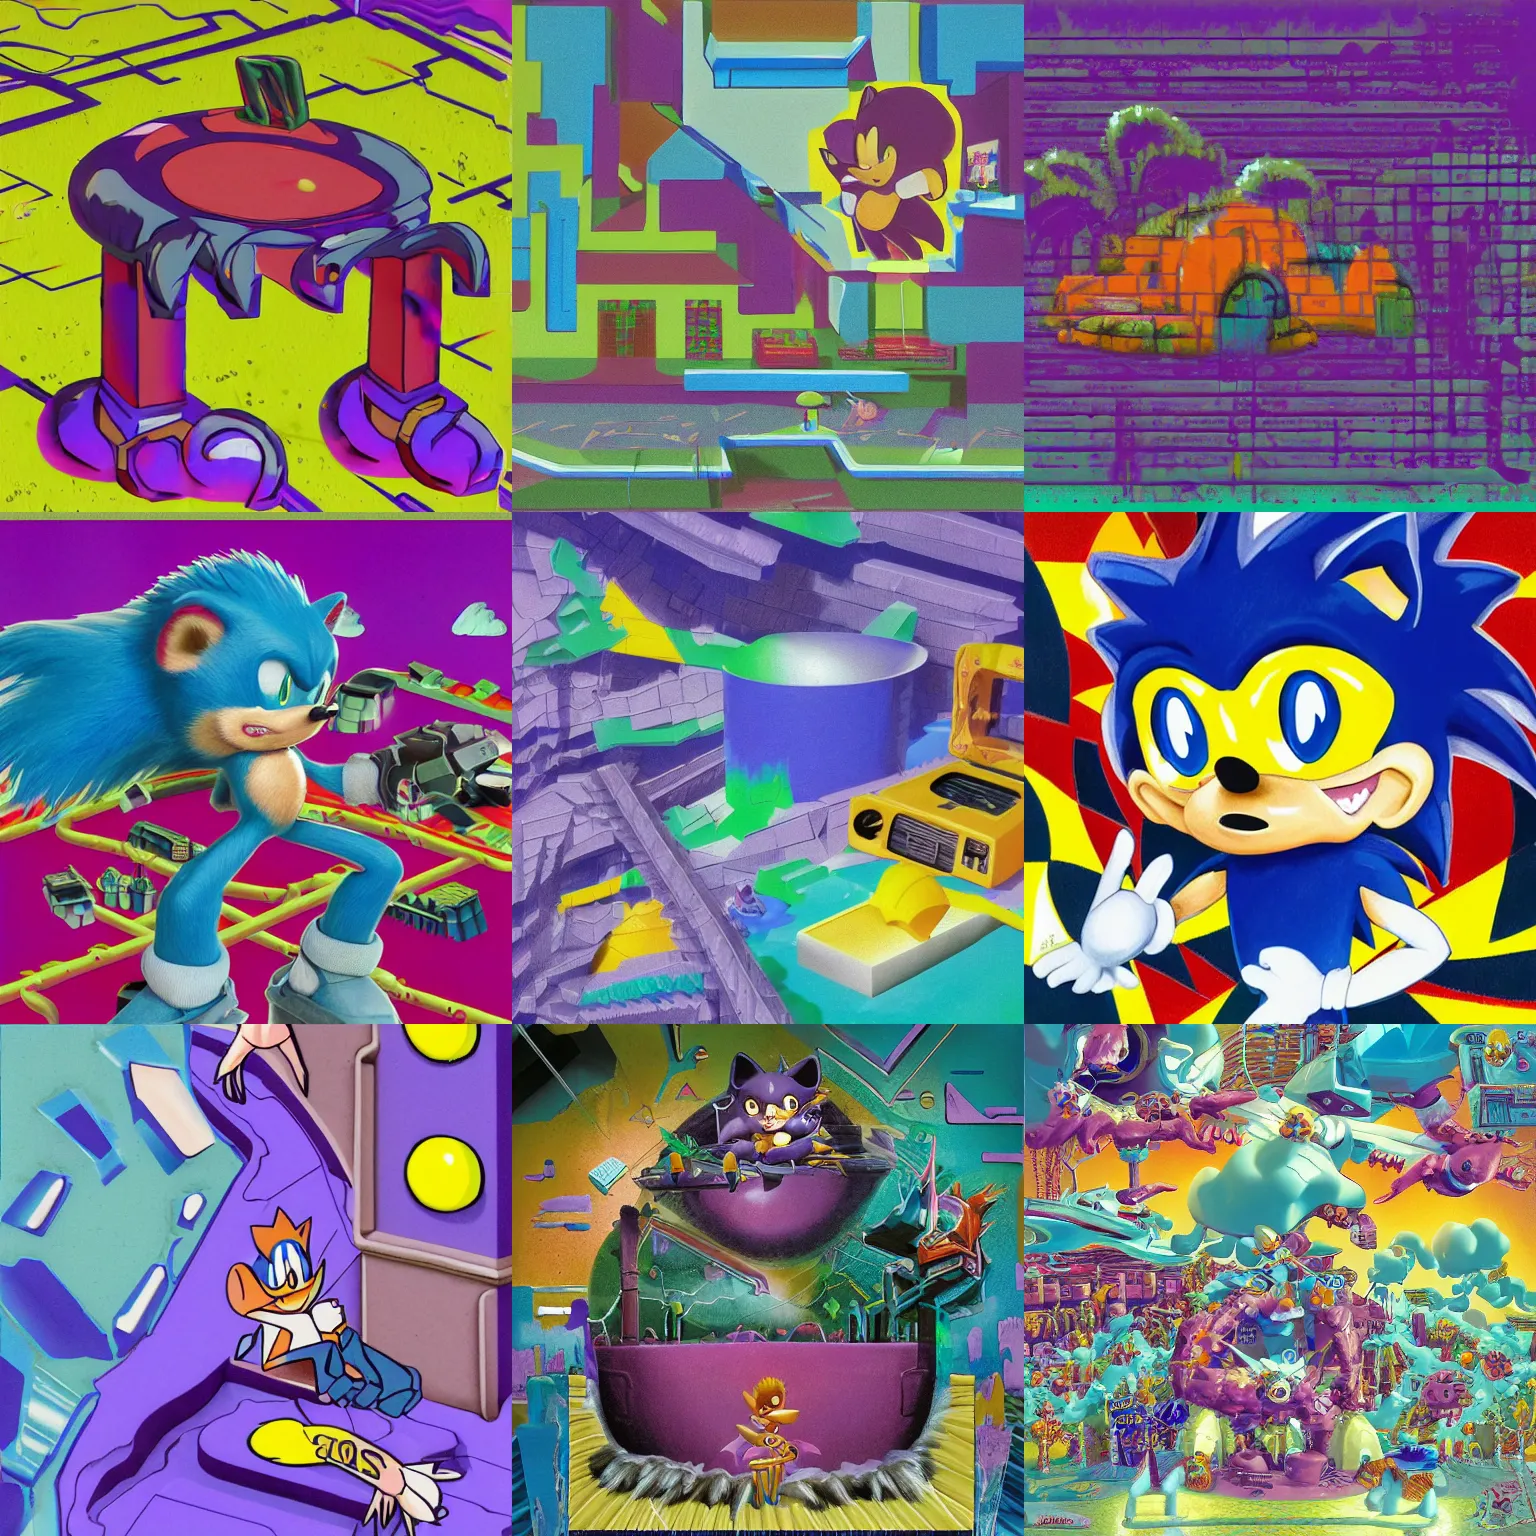 Prompt: dreaming of deconstructivist claymation portrait of sonic hedgehog and a matte painting landscape of a surreal sharp, jazz cup detailed professional soft pastels high quality airbrush art album cover of a liquid dissolving airbrush art lsd sonic the hedgehog swimming through cyberspace purple teal checkerboard background 1 9 9 0 s 1 9 9 2 sega genesis rareware video game album cover